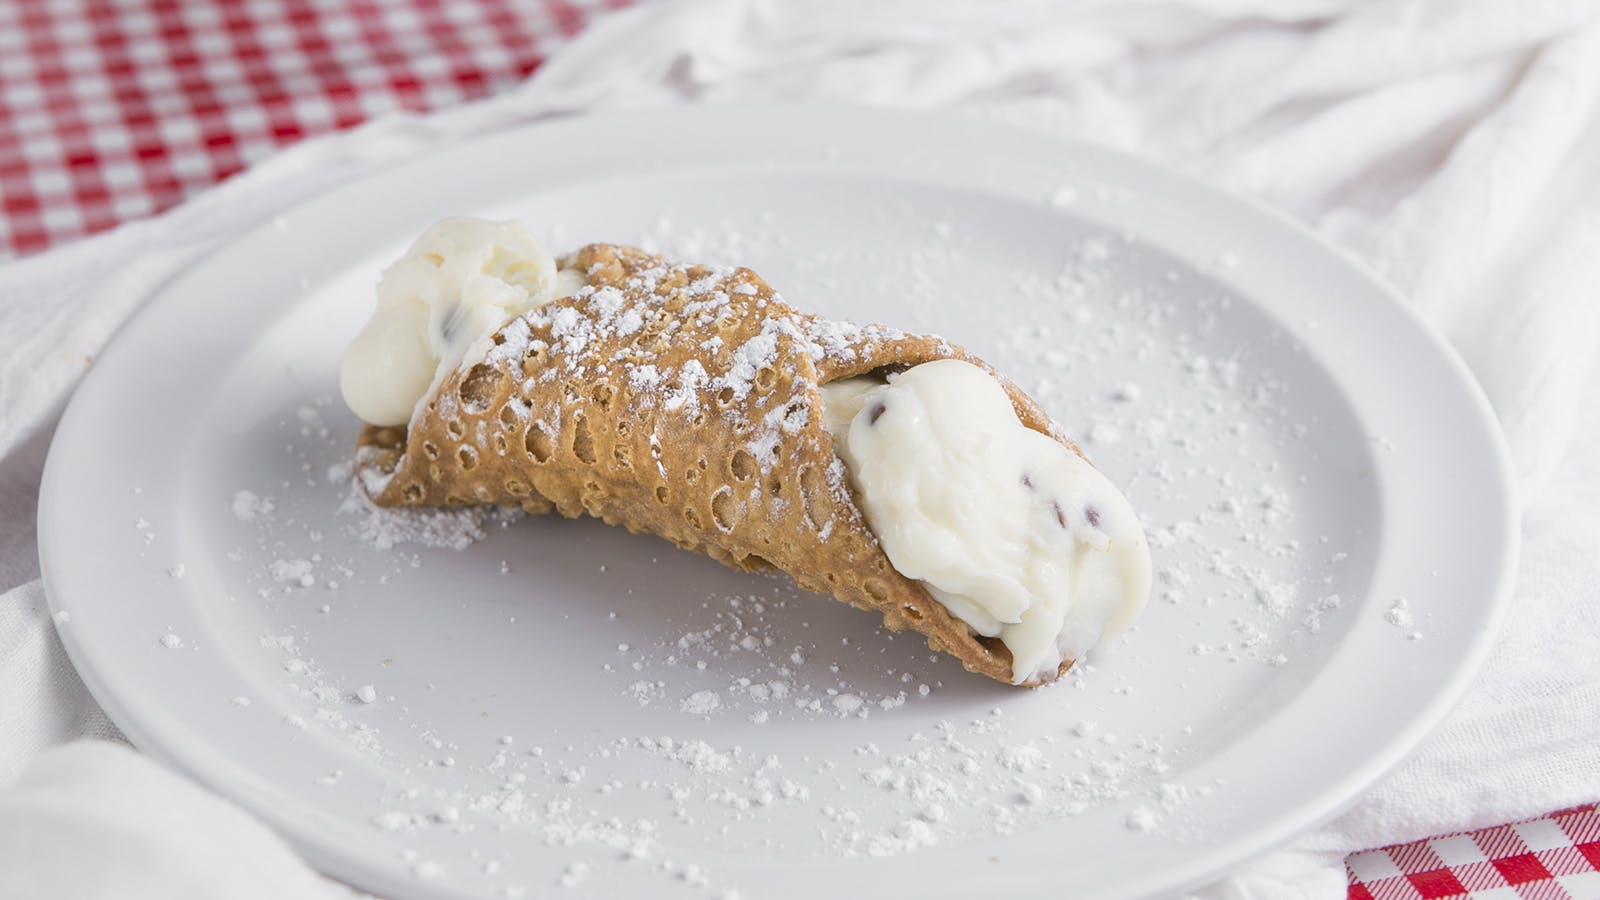 Cannoli from Aroma Pizza & Pasta in Lake Forest, CA